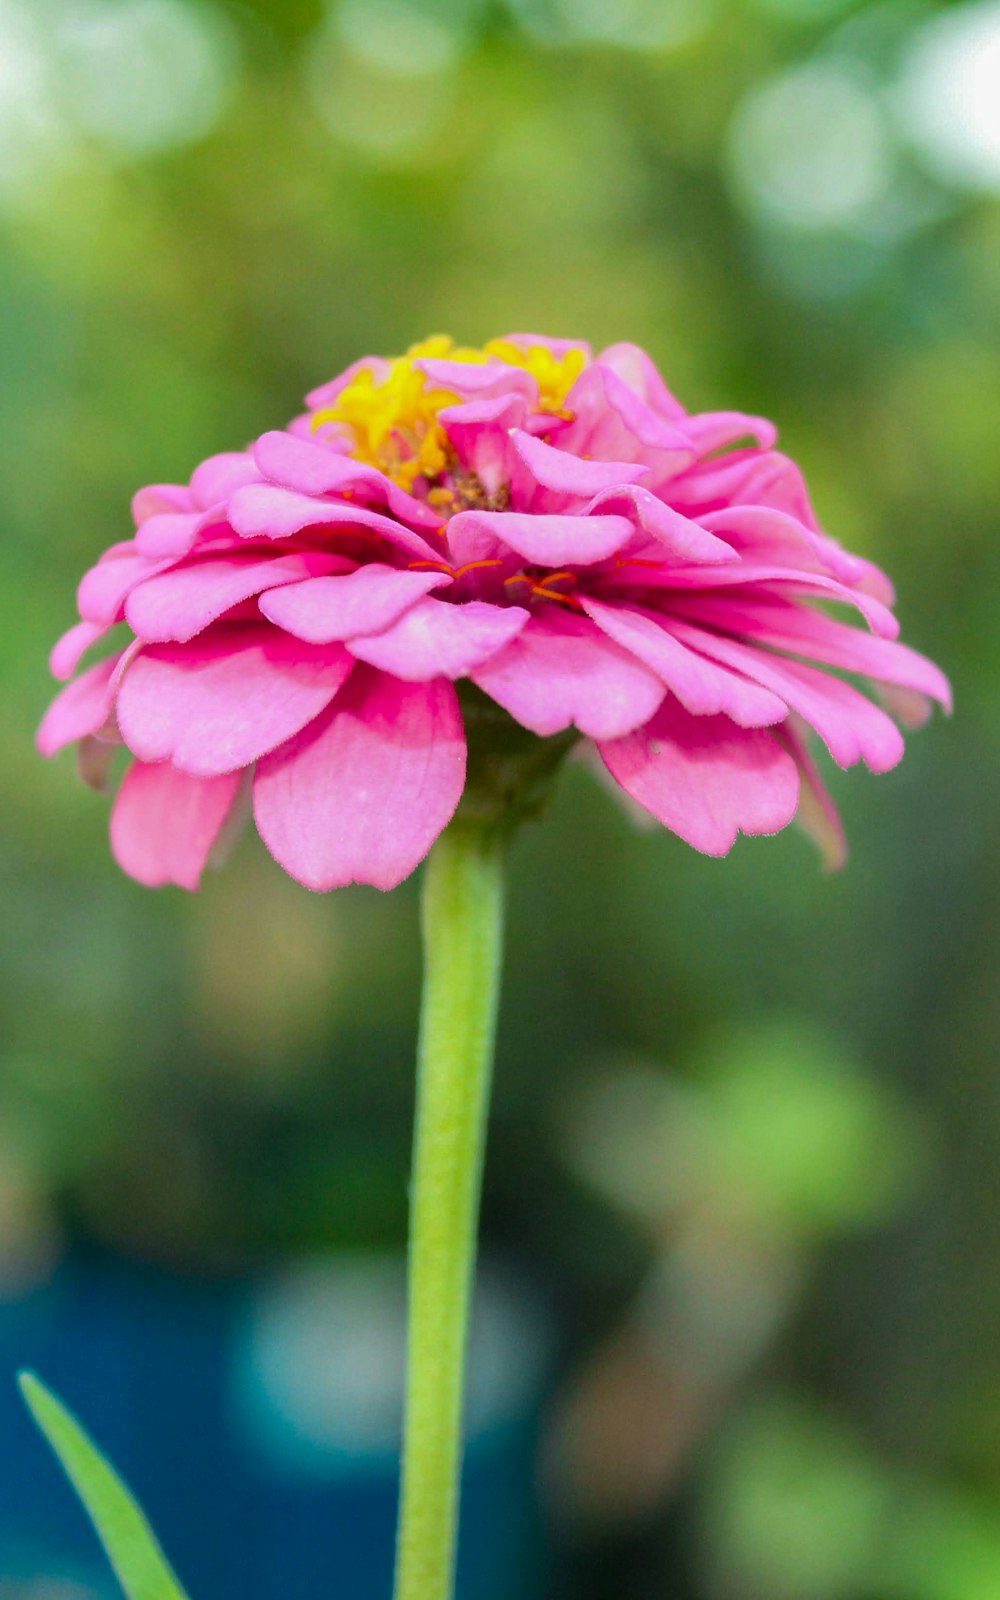 a pink flower with a yellow center in a vase